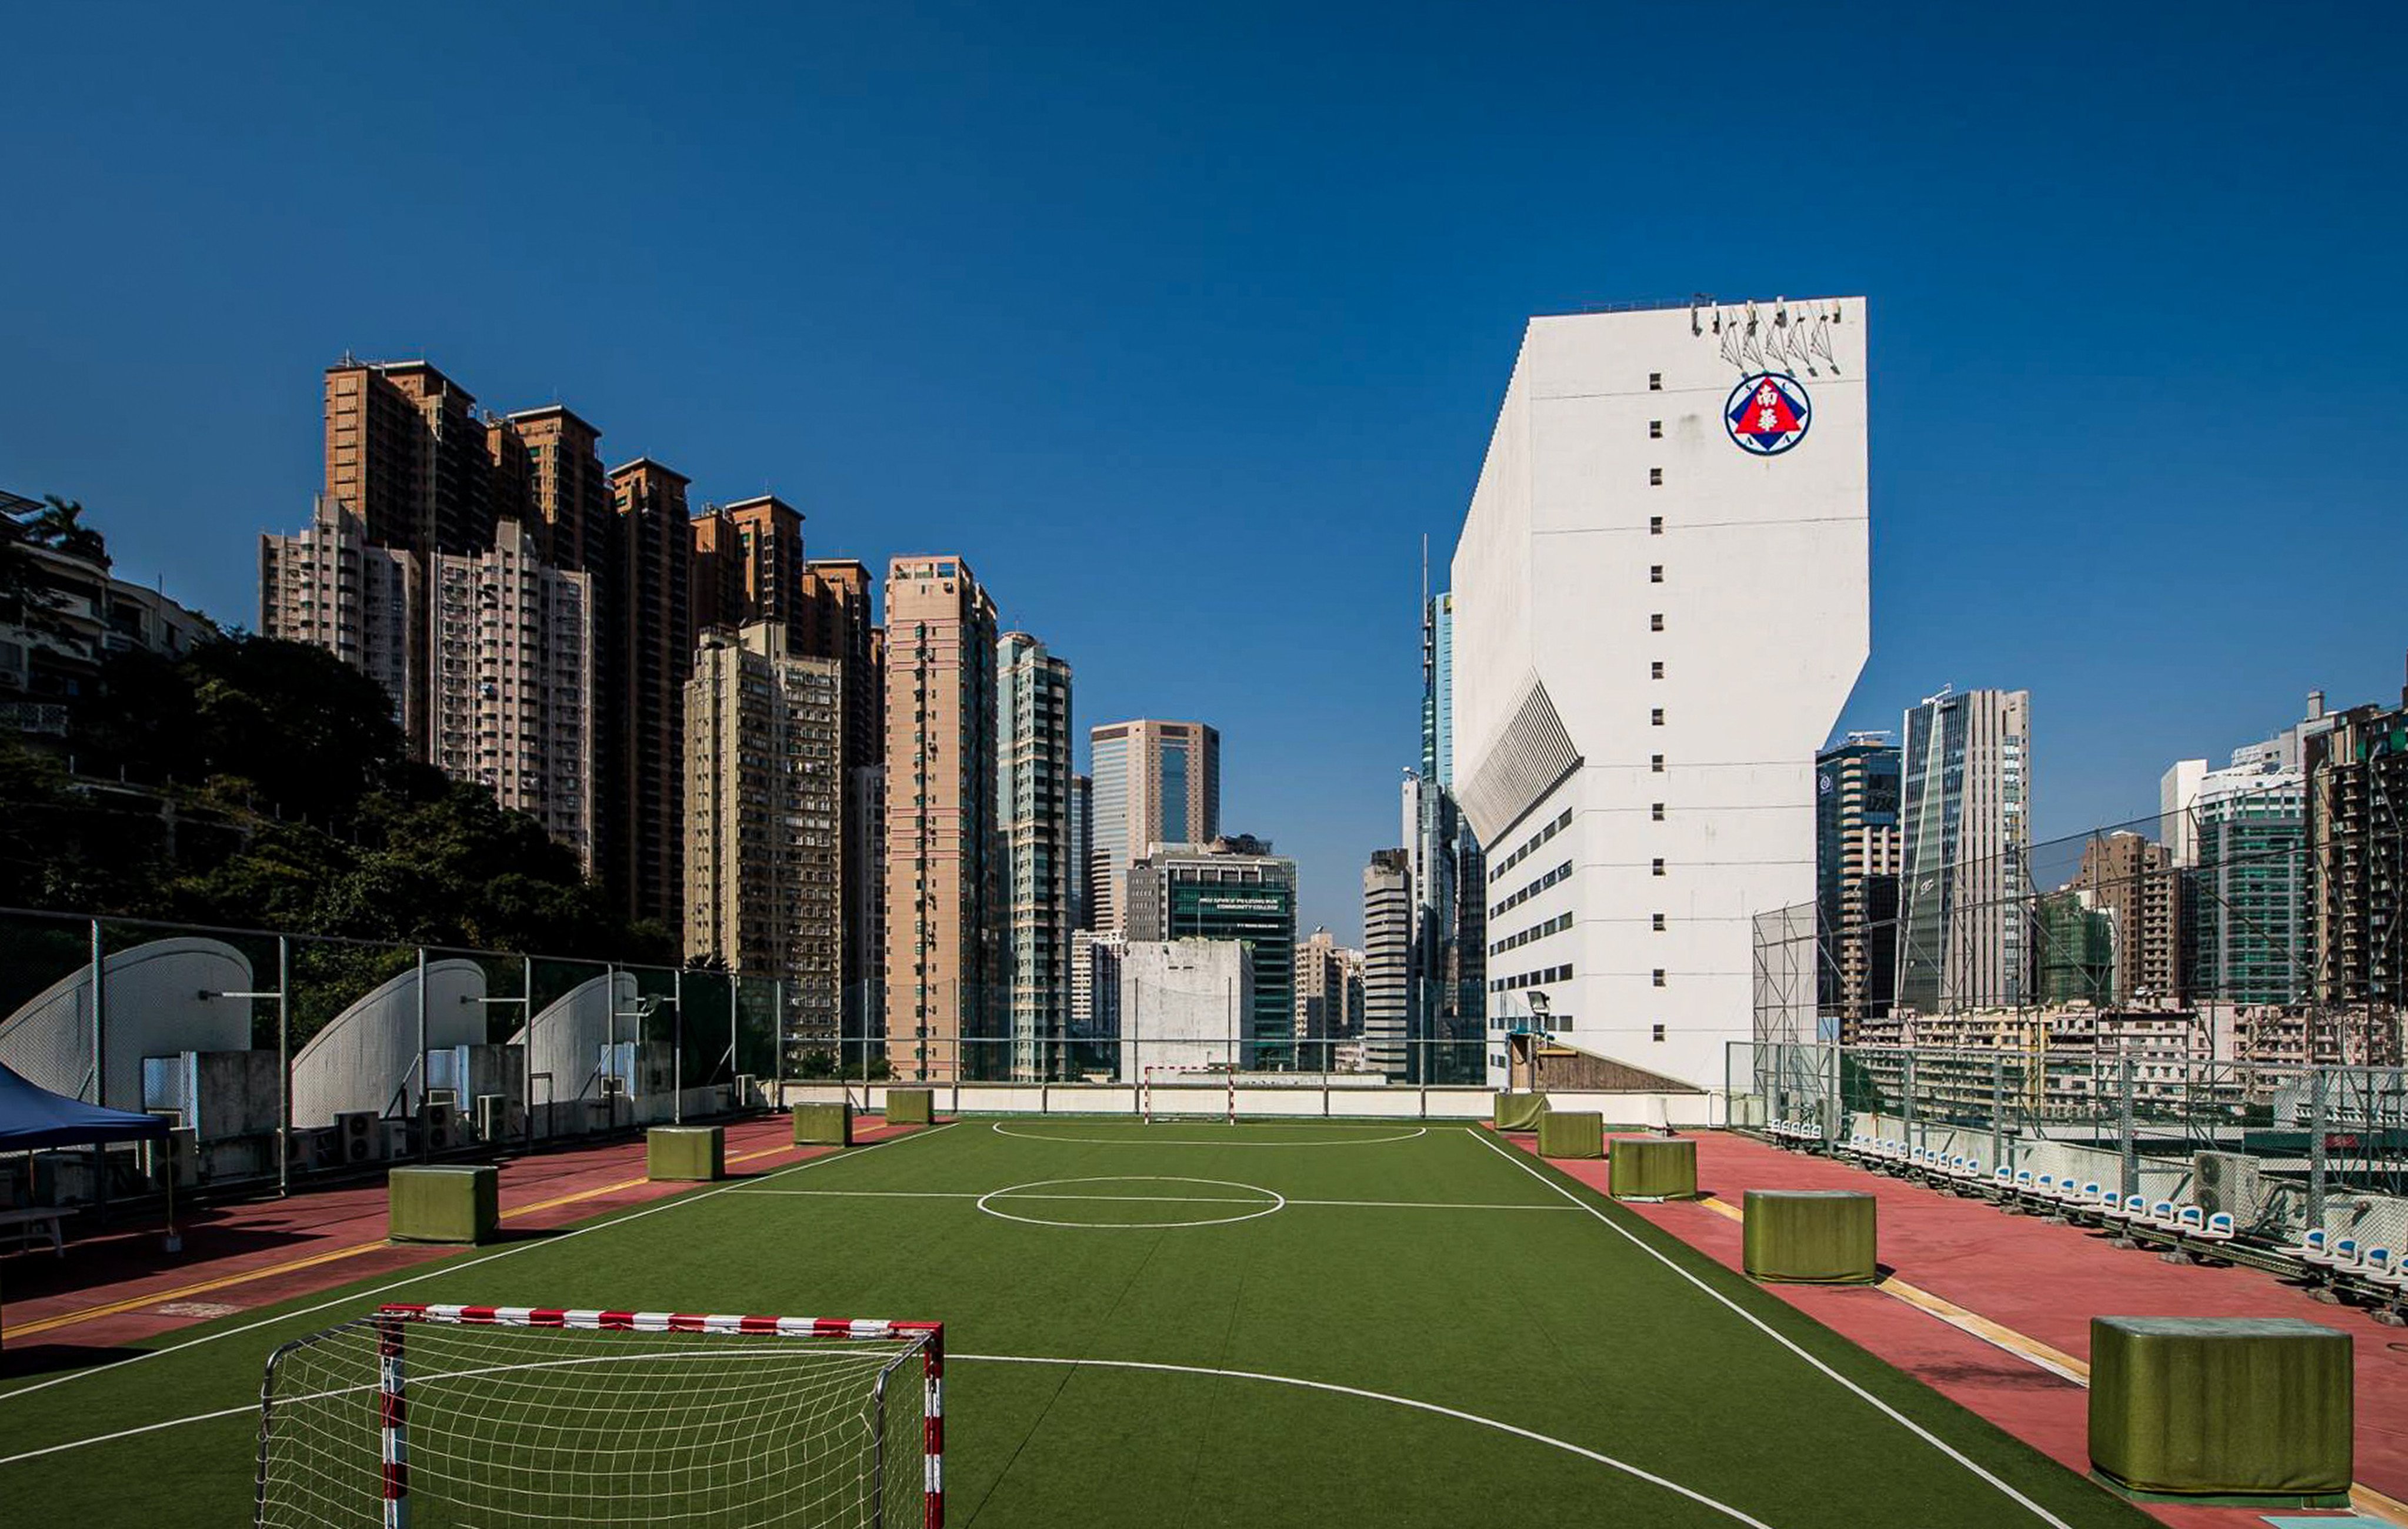 The South China Athletic Association sports centre at Causeway Bay. The club said its computer servers had been subject to “unauthorised third-party intrusion” on Sunday. Photo: SCAA